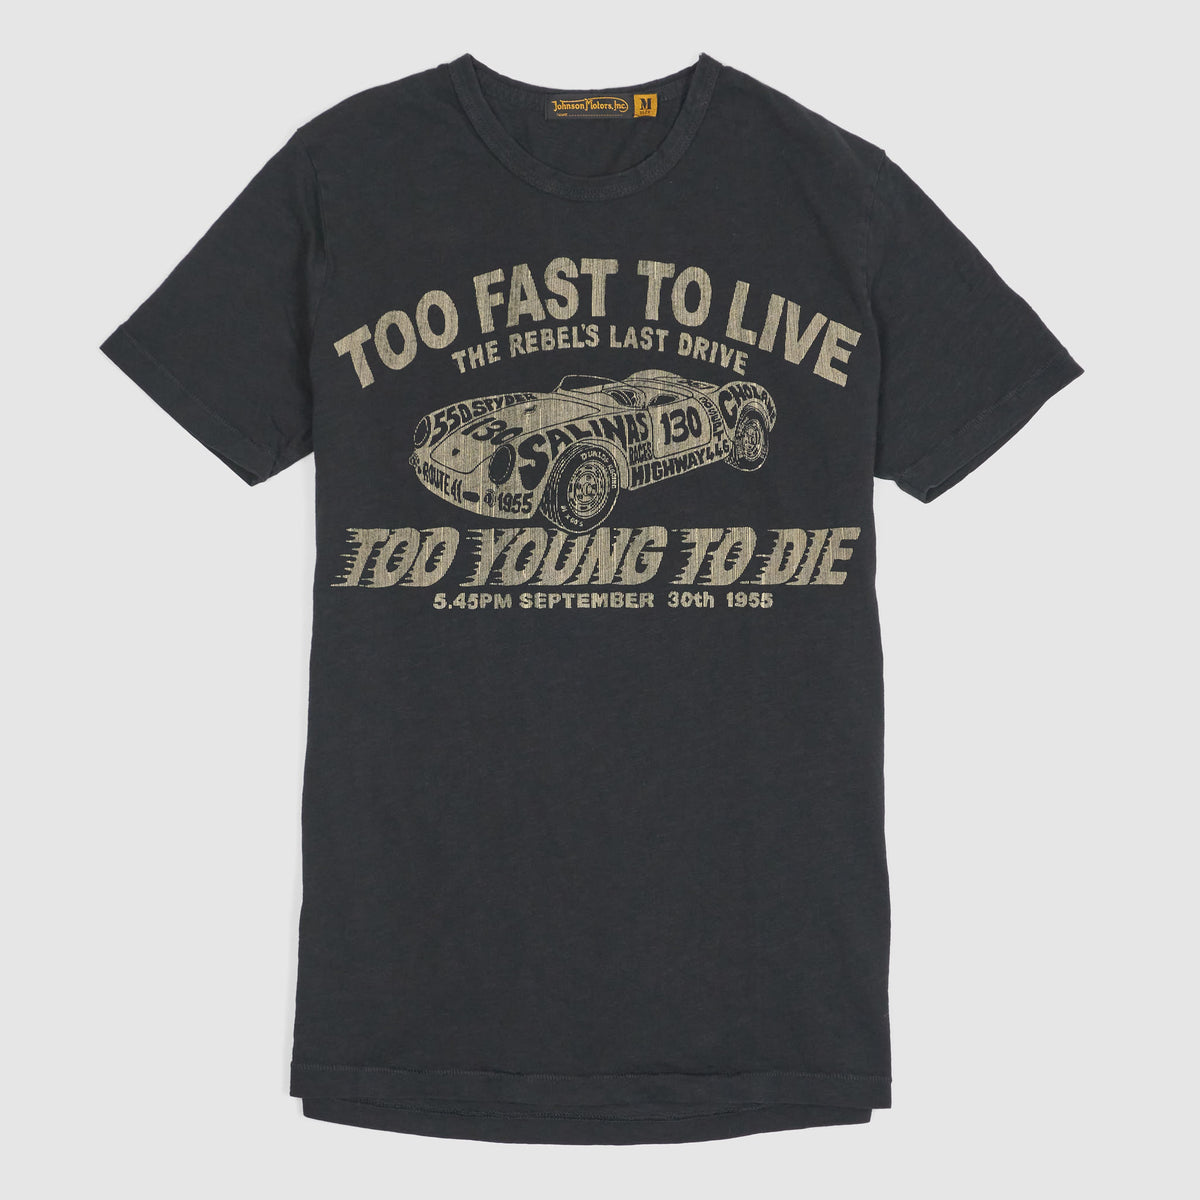 Johnson Motors Inc. To fast to live Crew Neck T-Shirts